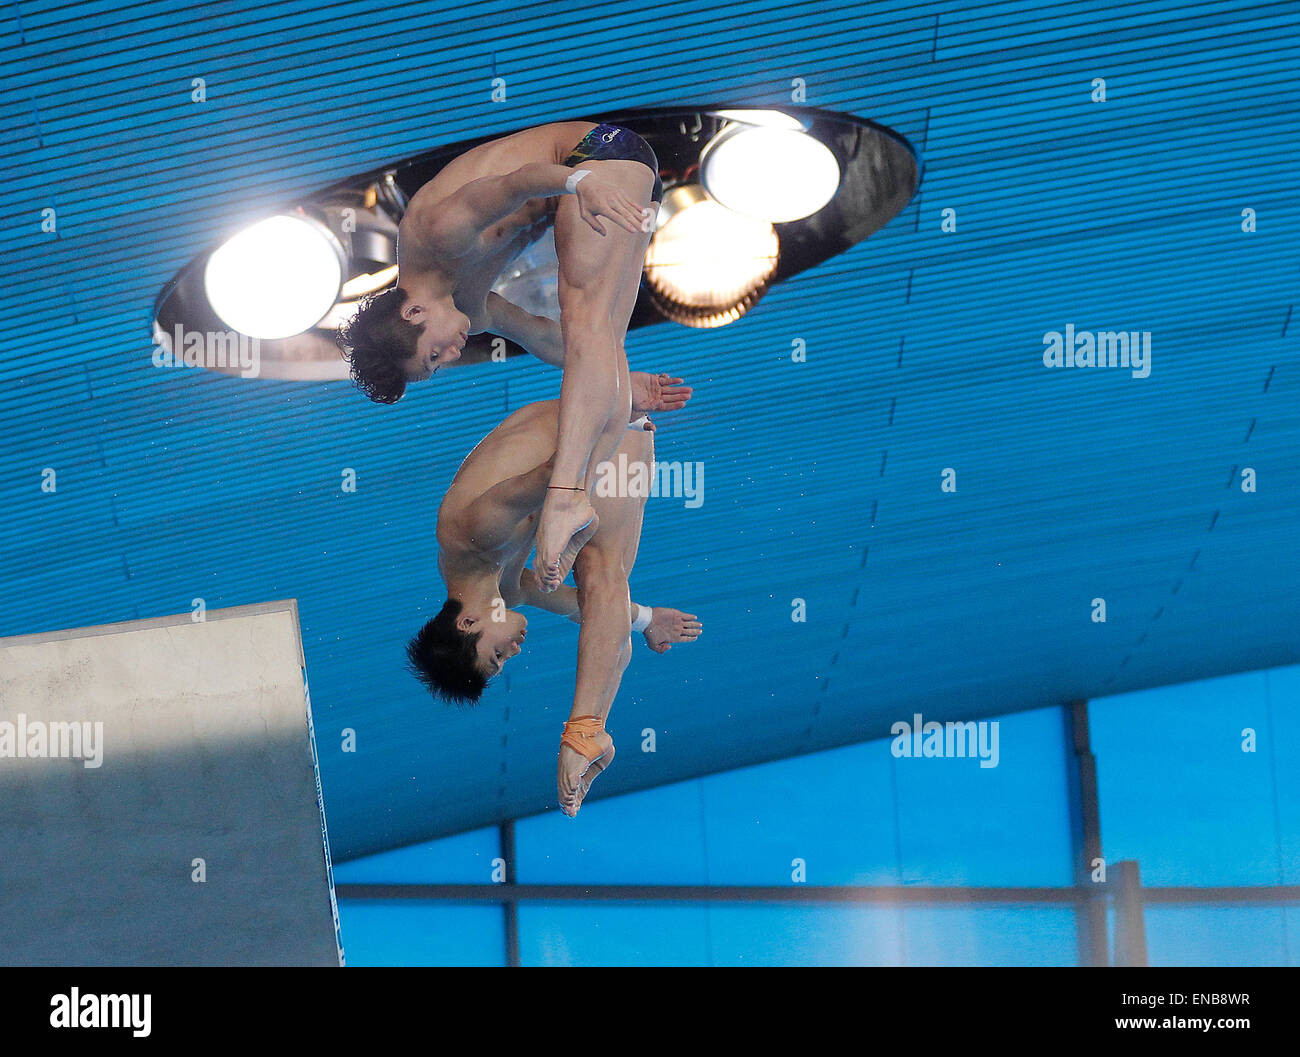 London, UK. 01st May, 2015. Yue Lin and Aisen Chen of China compete in the 10m Platform Synchro Men Final during day one of the FINA/NVC Diving World Series 2015 at the London Aquatics Centre on May 01, 2015 in London, Great Britain. Credit:  Mitchell Gunn/ESPA/Alamy Live News Stock Photo